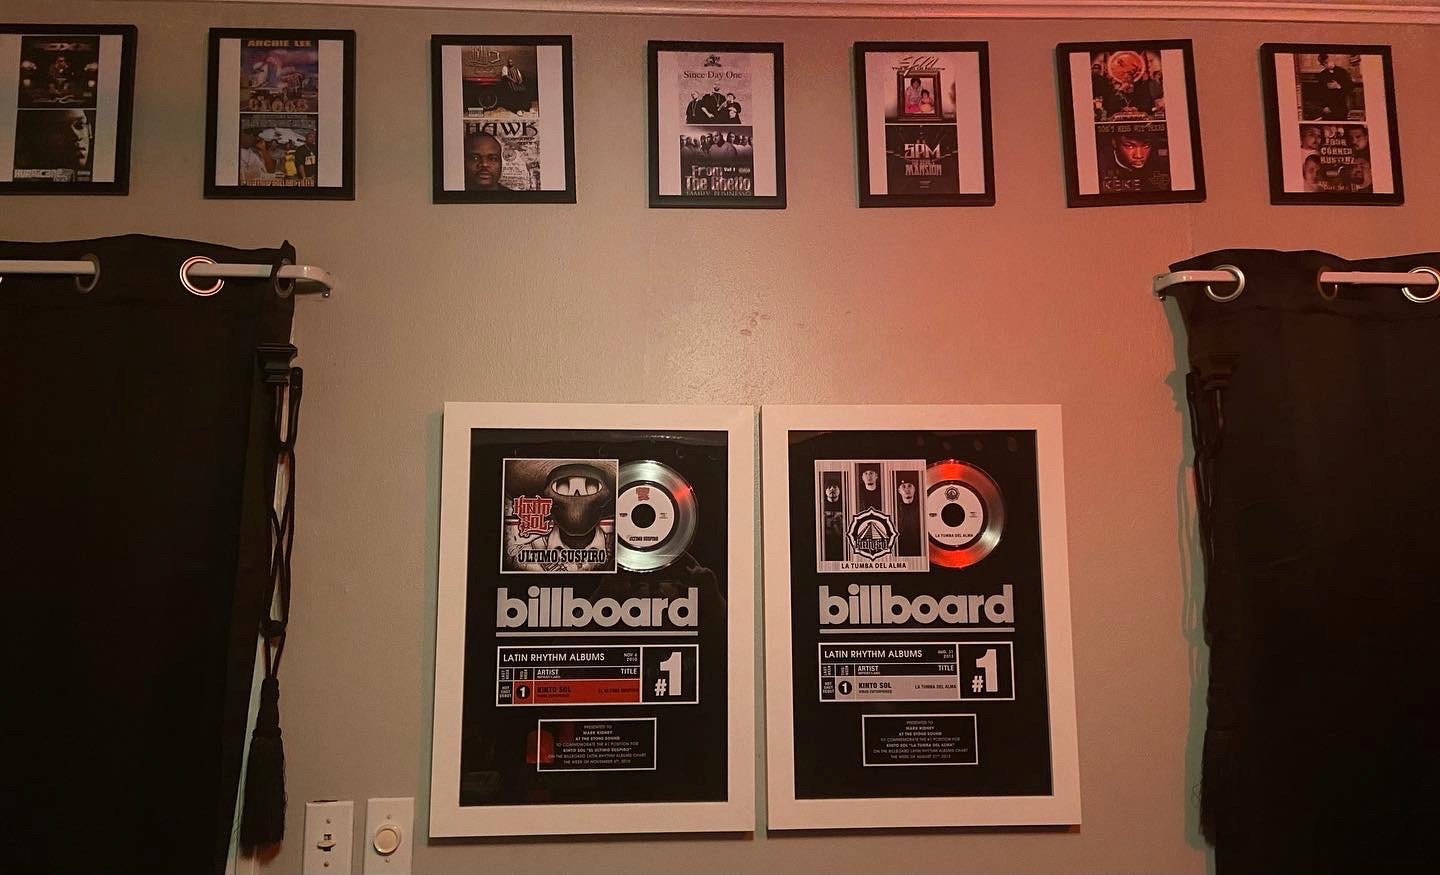 ACOUPLE OF BILLBOARD AWARDS I RECIEVED FOR MIXING AND MASTERING